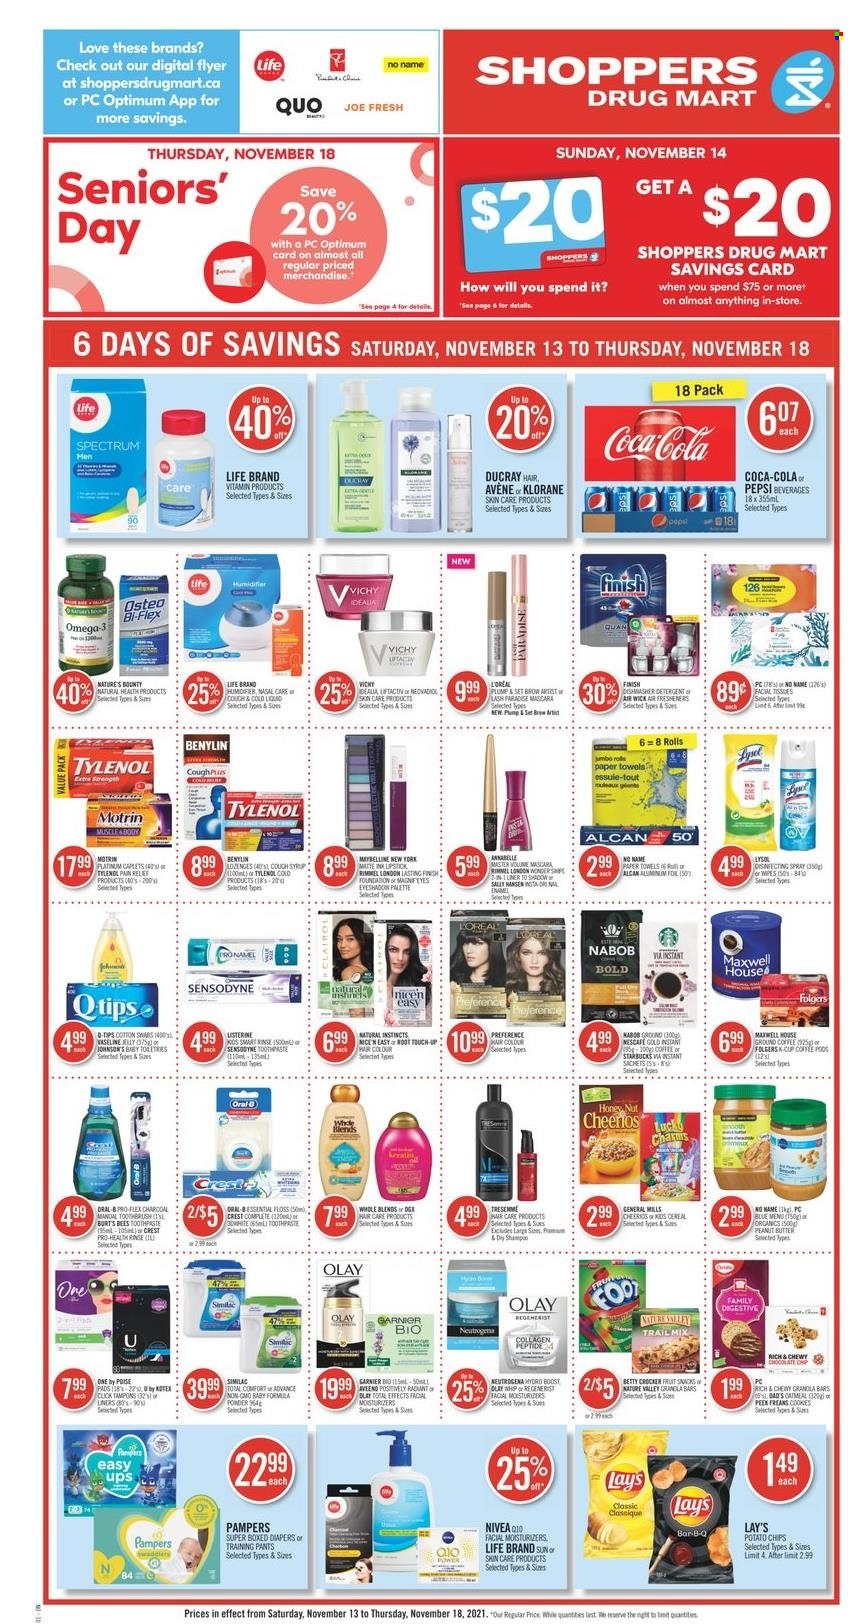 thumbnail - Shoppers Drug Mart Flyer - November 13, 2021 - November 18, 2021 - Sales products - chocolate, snack, Bounty, potato chips, Lay’s, cereals, Cheerios, granola bar, peanut butter, syrup, trail mix, Coca-Cola, Pepsi, Boost, coffee, Folgers, ground coffee, Starbucks, Similac, pants, nappies, baby pants, kitchen towels, paper towels, Vichy, toothpaste, Crest, tampons, L’Oréal, moisturizer, Olay, Palette, hair color, Klorane, lipstick, mascara, Rimmel, humidifier, Tylenol, Omega-3, Osteo bi-flex, Bi-Flex, Spectrum, Benylin, Motrin, detergent, Garnier, Maybelline, Neutrogena, Pampers, Nivea, Oral-B, chips, Sensodyne, Nescafé. Page 1.